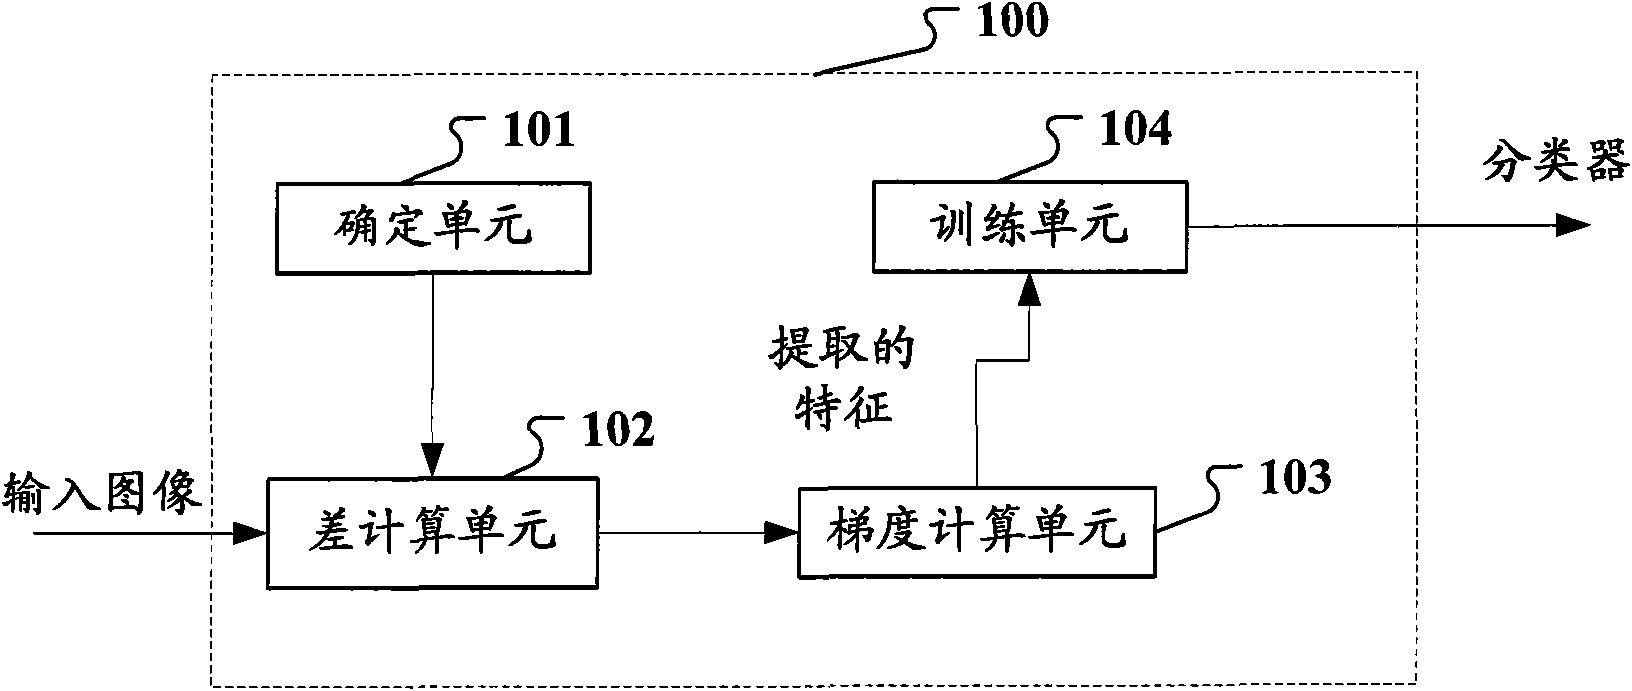 Method and apparatus for classifying image